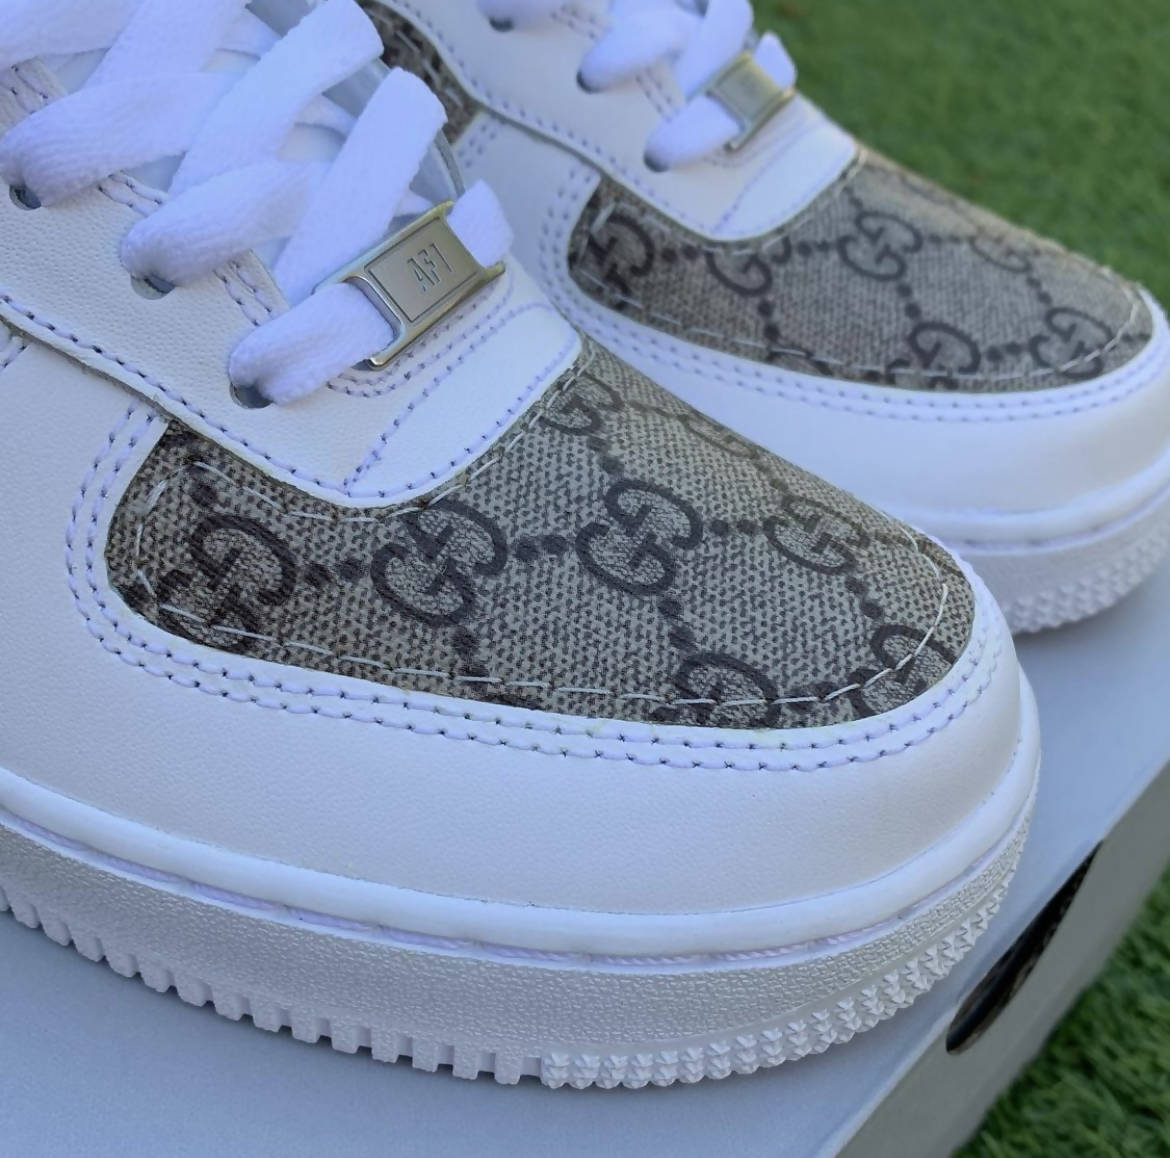 'Gucci Fabric Inspired' Air Force 1